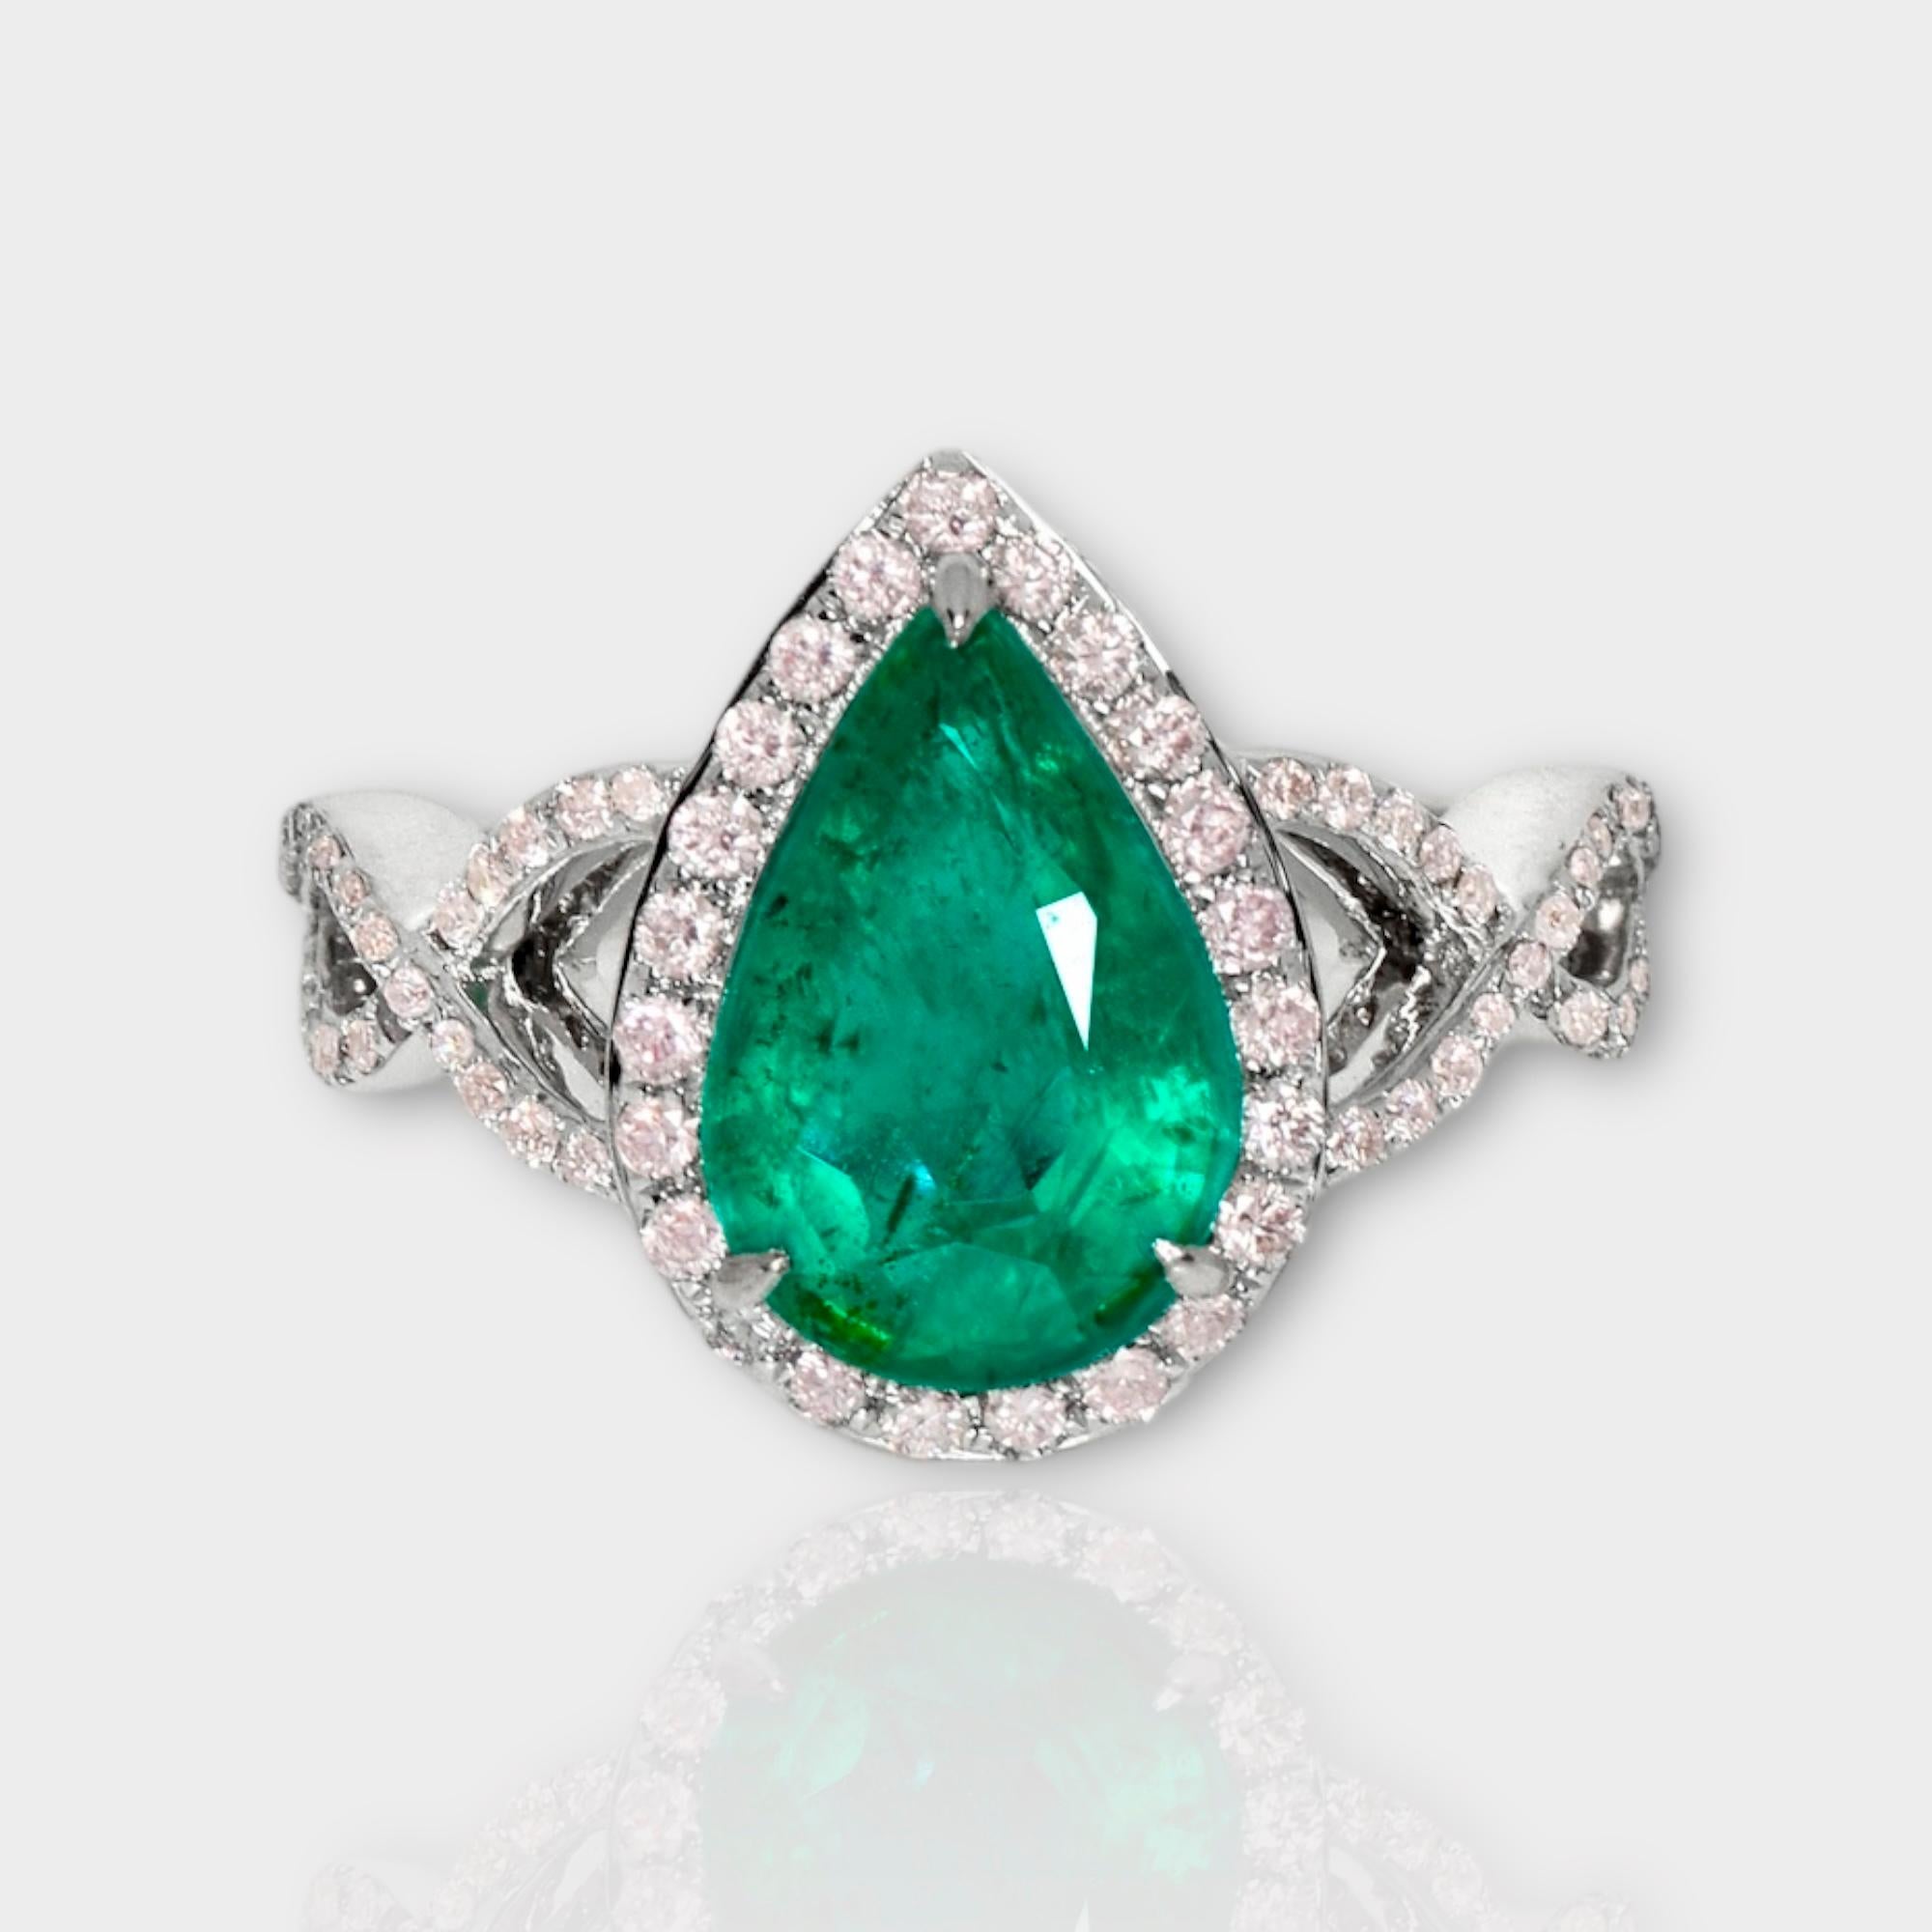 **IGI 18K White Gold 2.70 ct Emerald&Pink Diamonds Antique Art Deco Style Engagement Ring** 

An IGI-certified natural Zambia green emerald weighing 2.70 ct is set on an 18K white gold arc deco design band with natural pink diamonds weighing 0.46